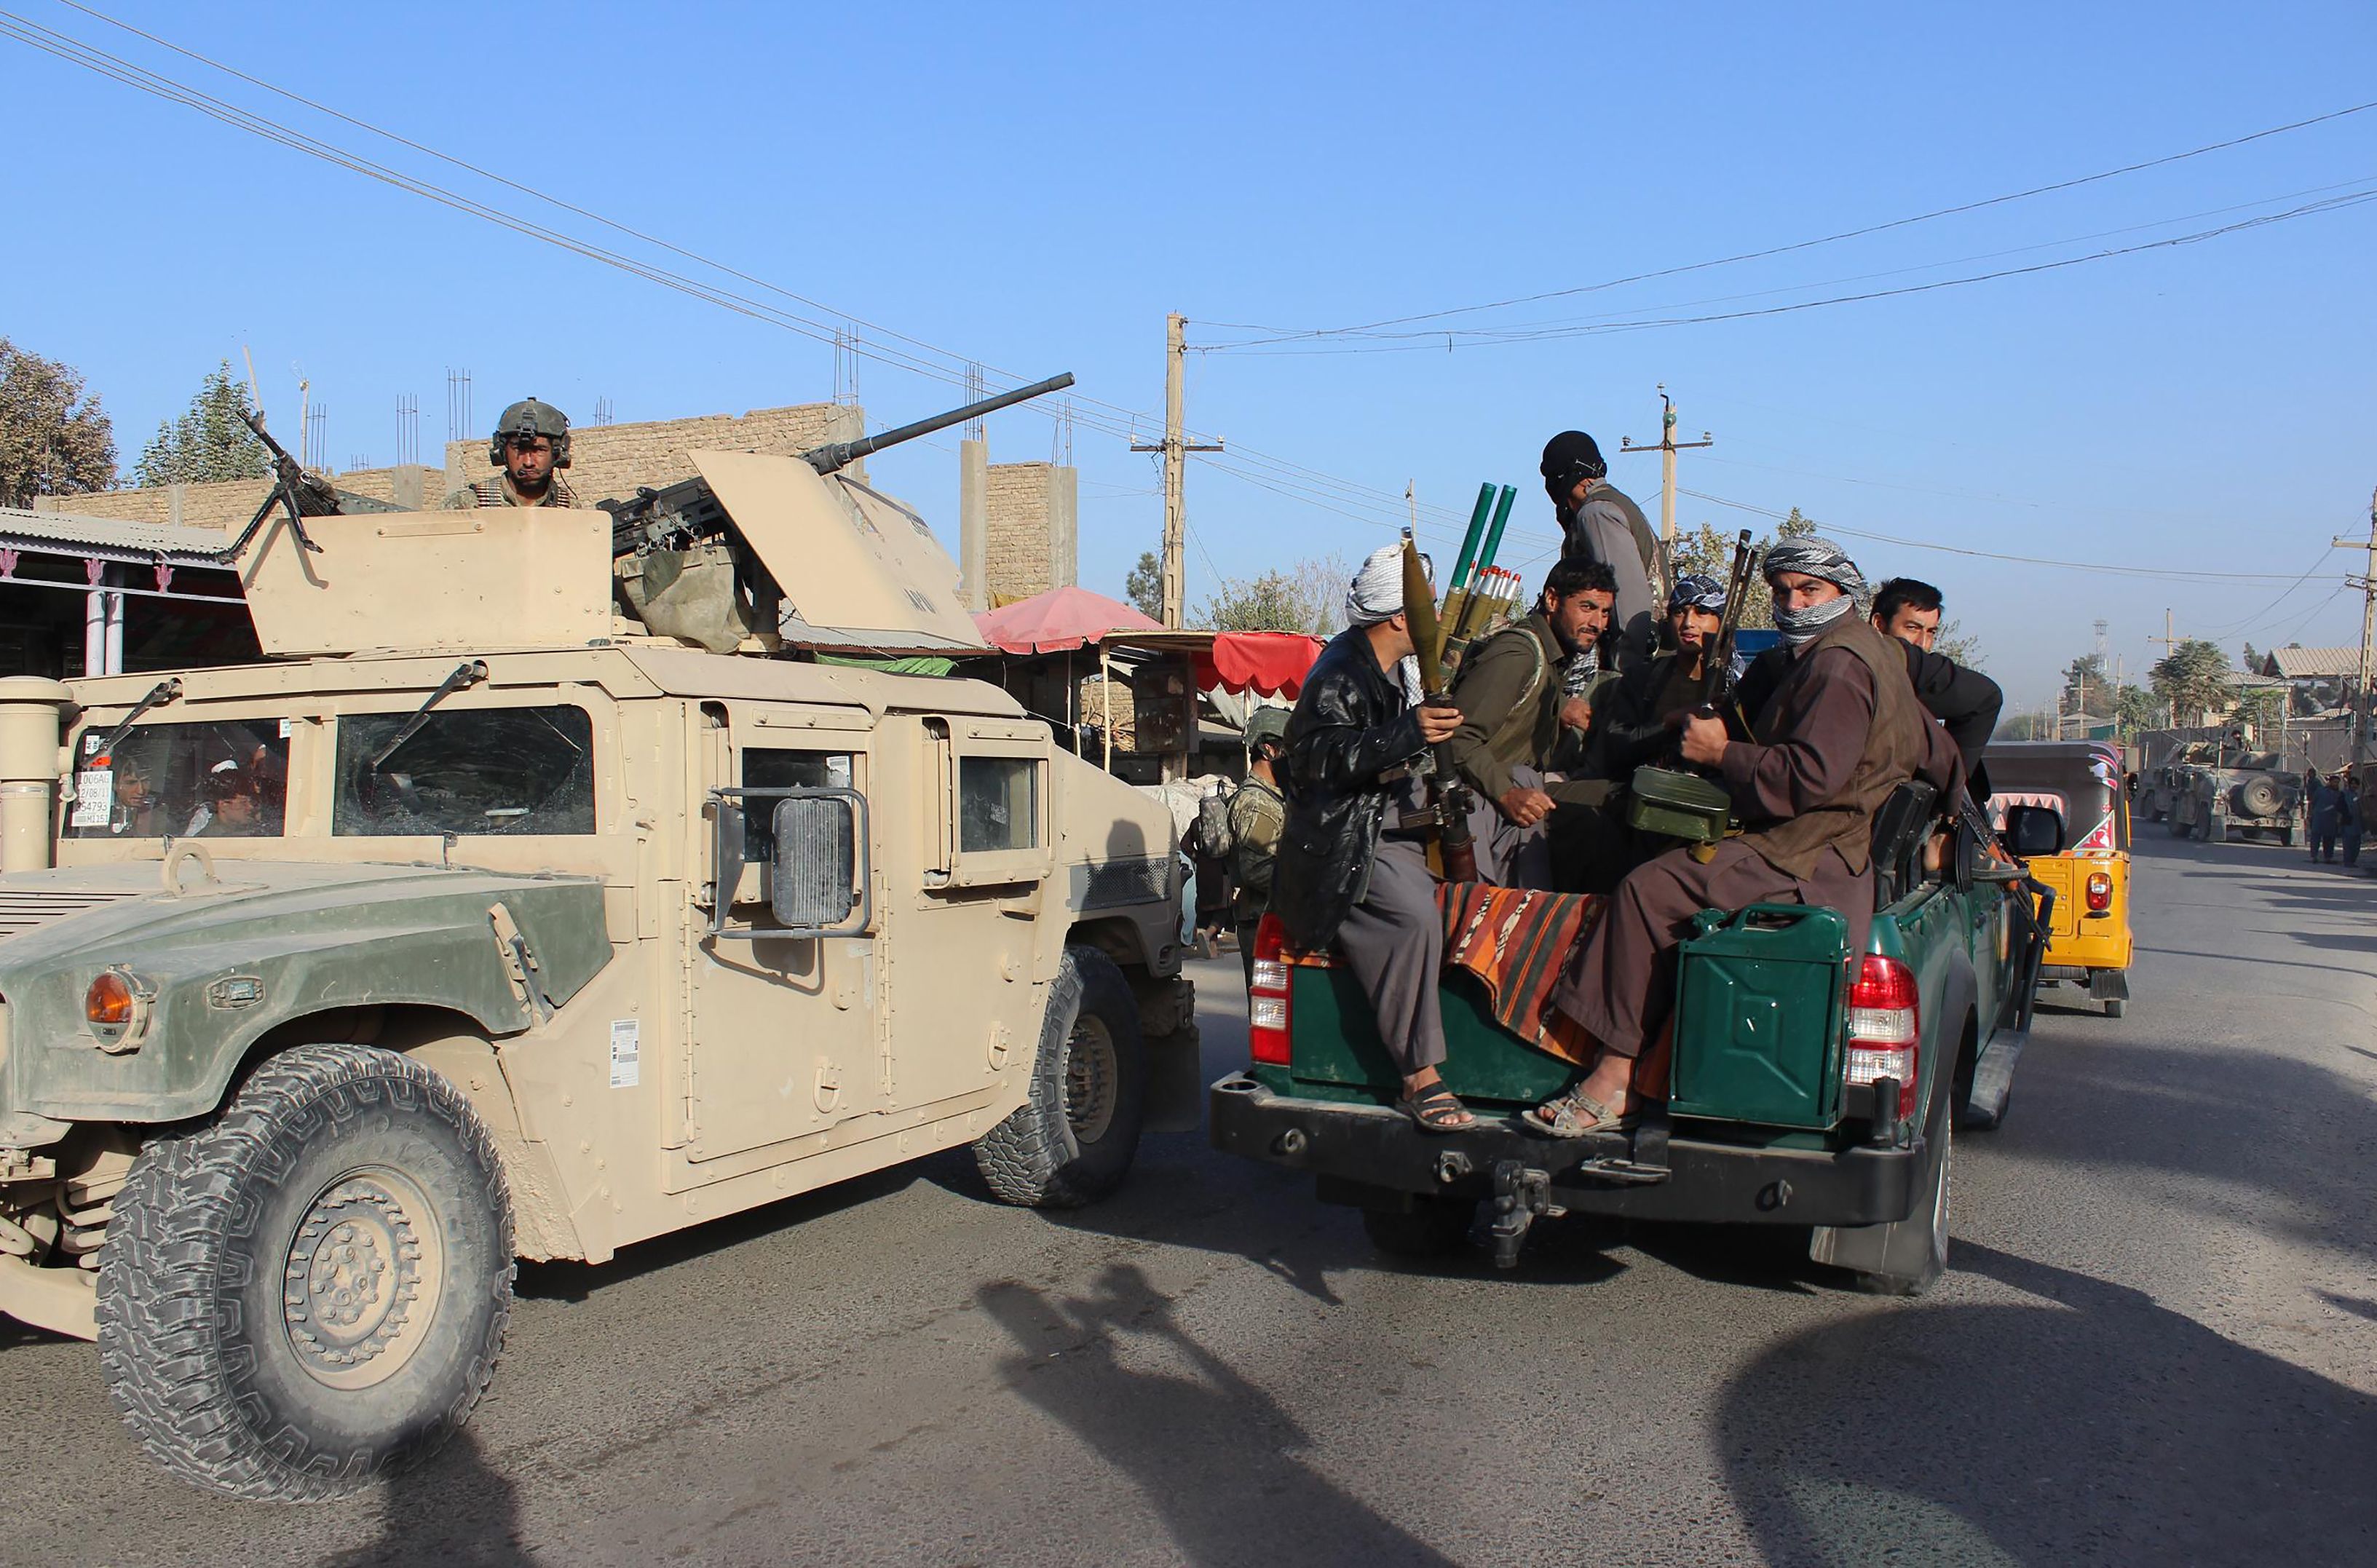 Afghan officials say troops clear Taliban from Kunduz amid sporadic clashes